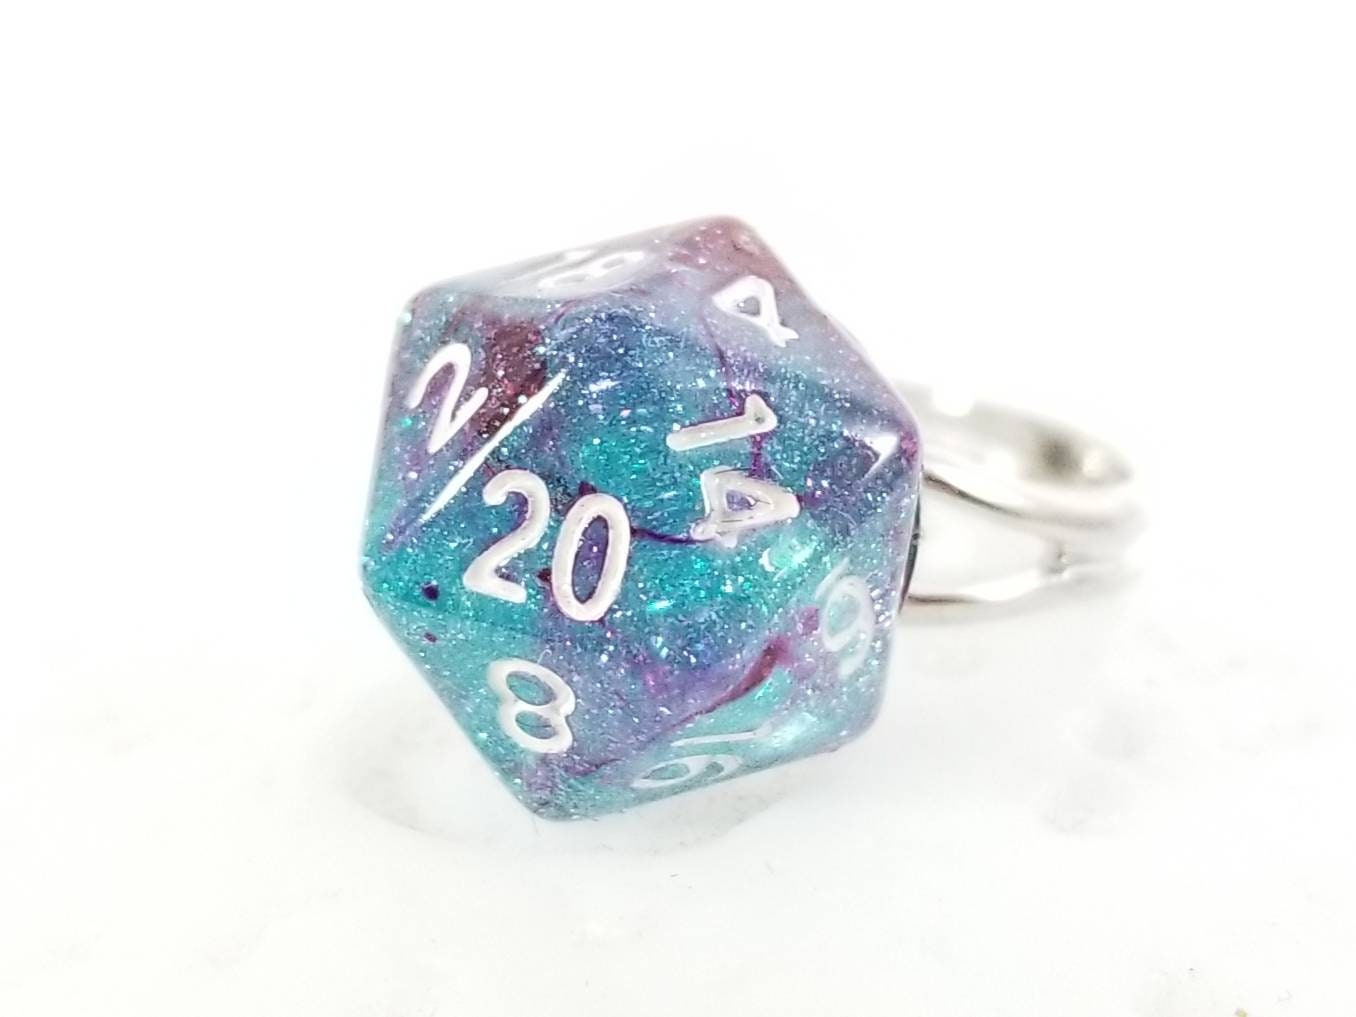 D&D RPG D20 Dice Vector Sterling Silver Signet Seal Ring 